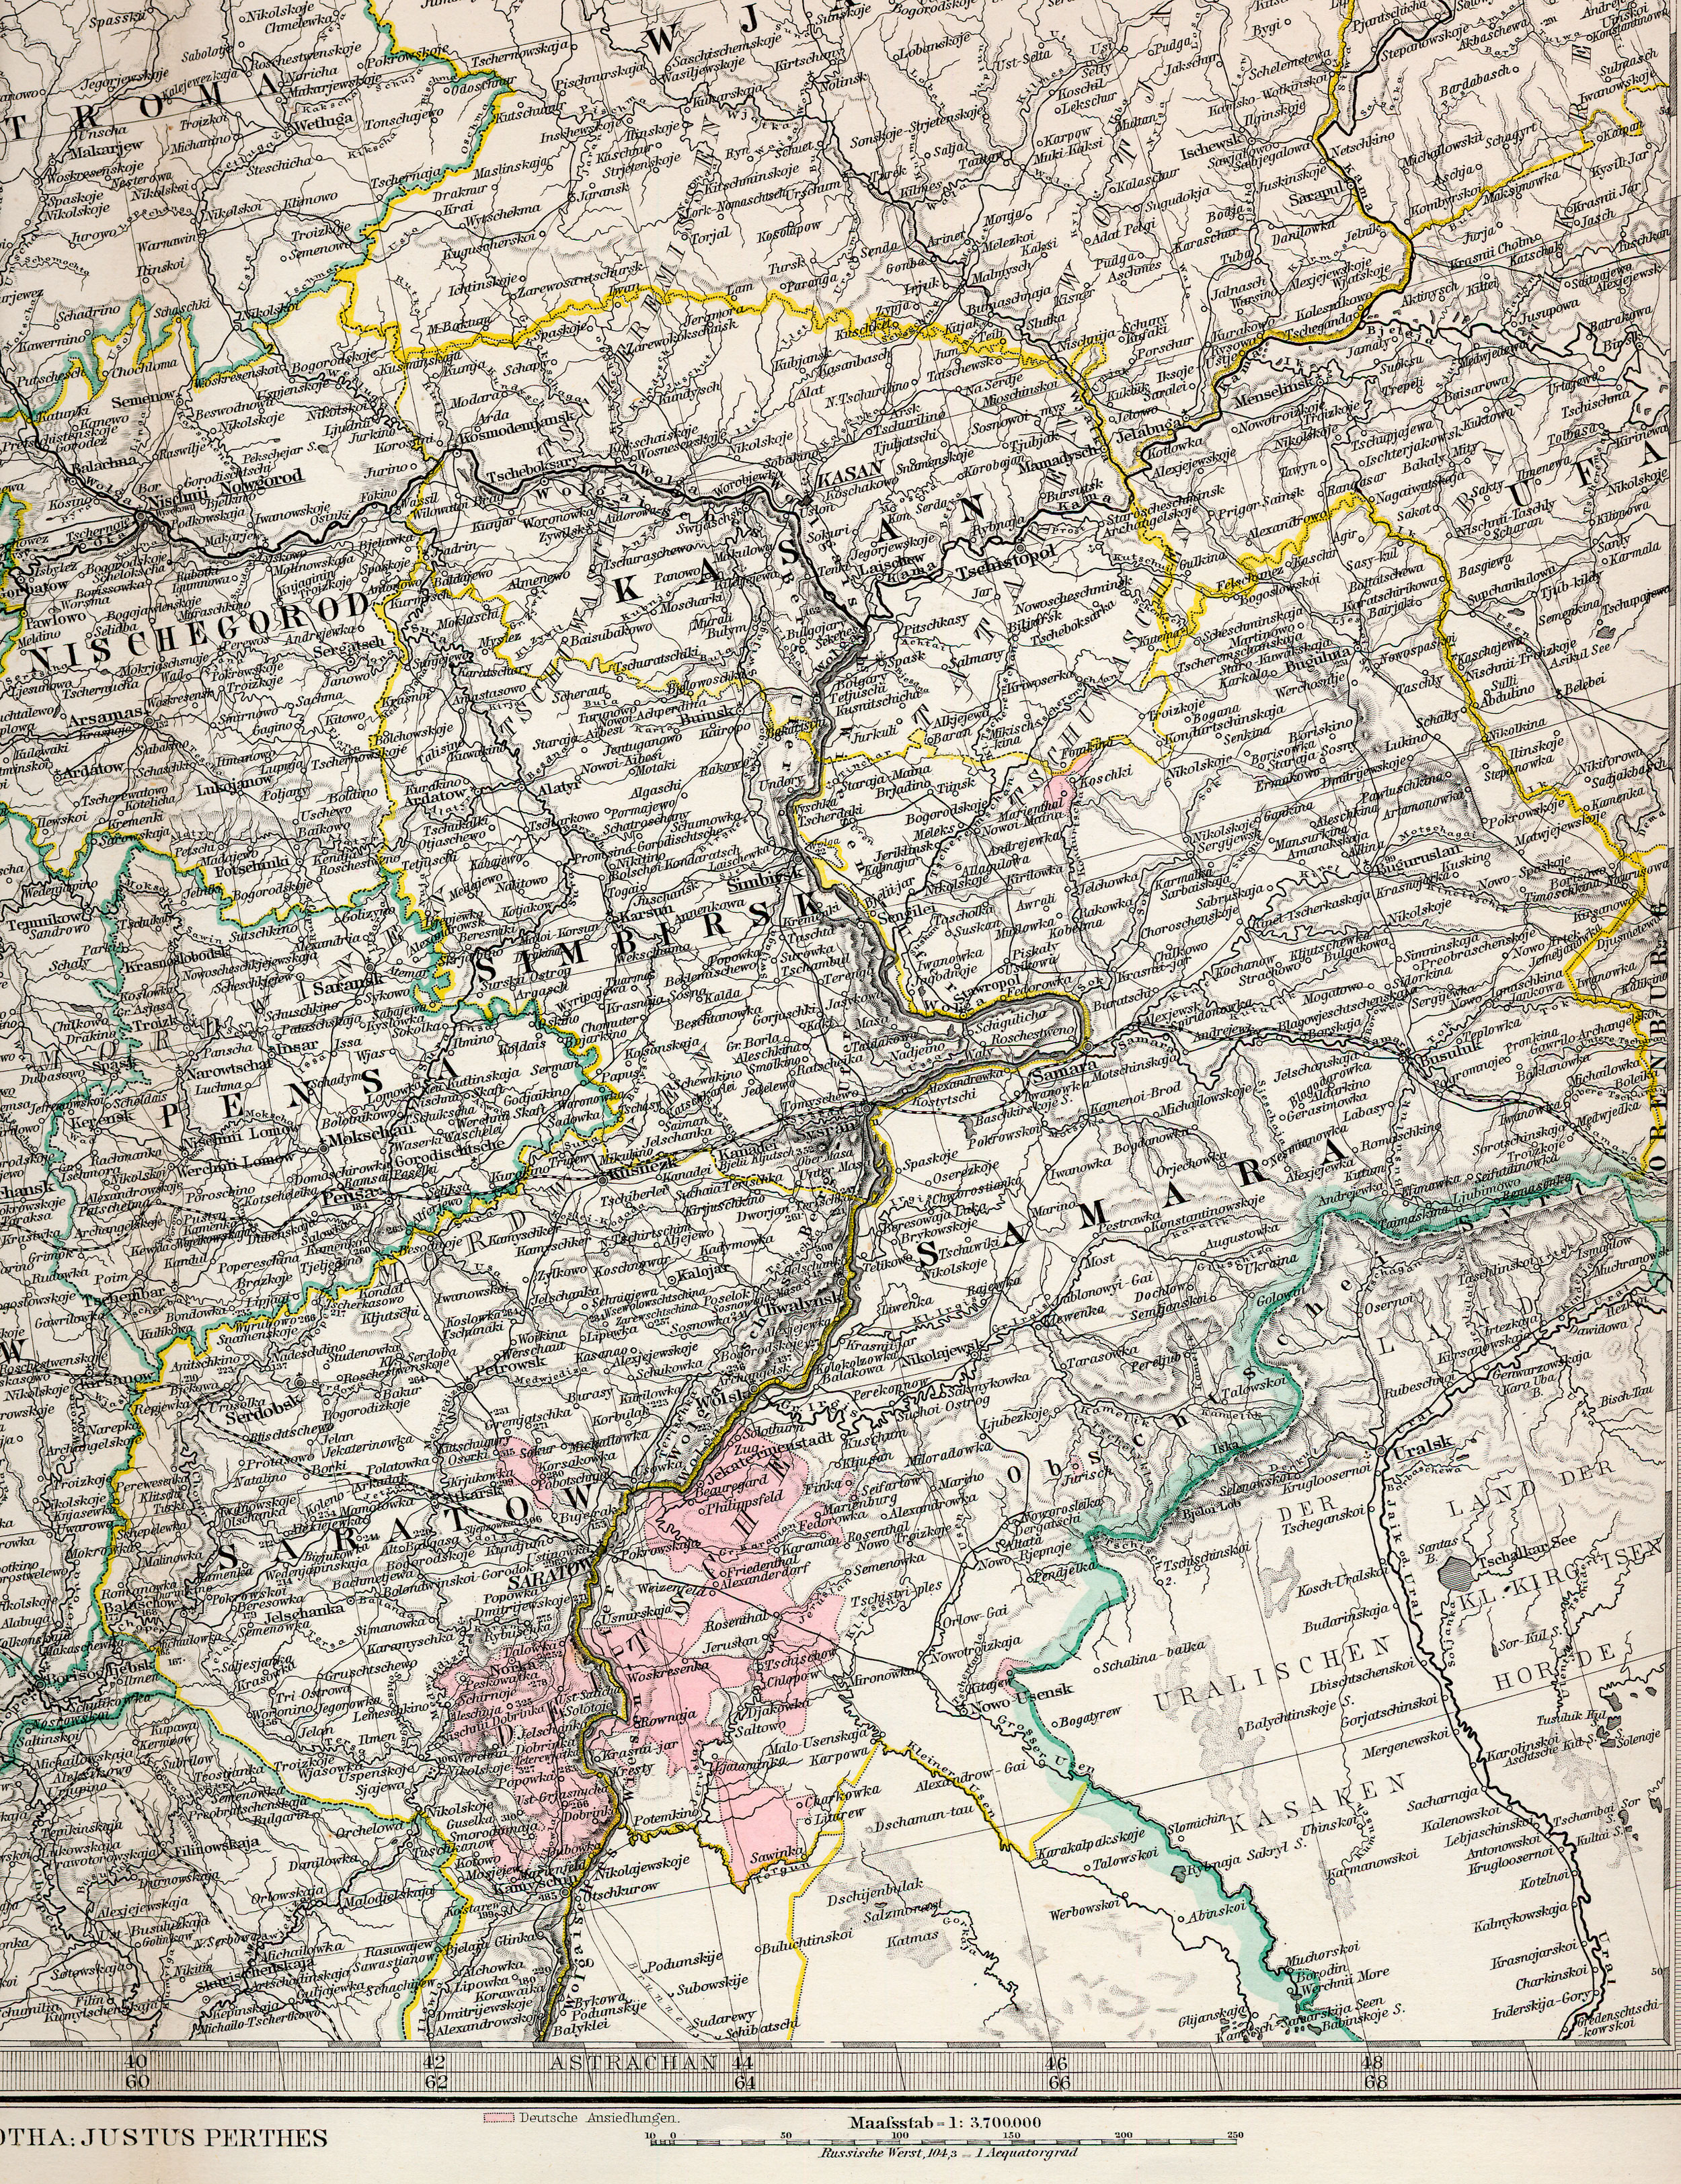 1882 Map of the Saratov area by Stieler. Courtesy of Steve Schreiber.